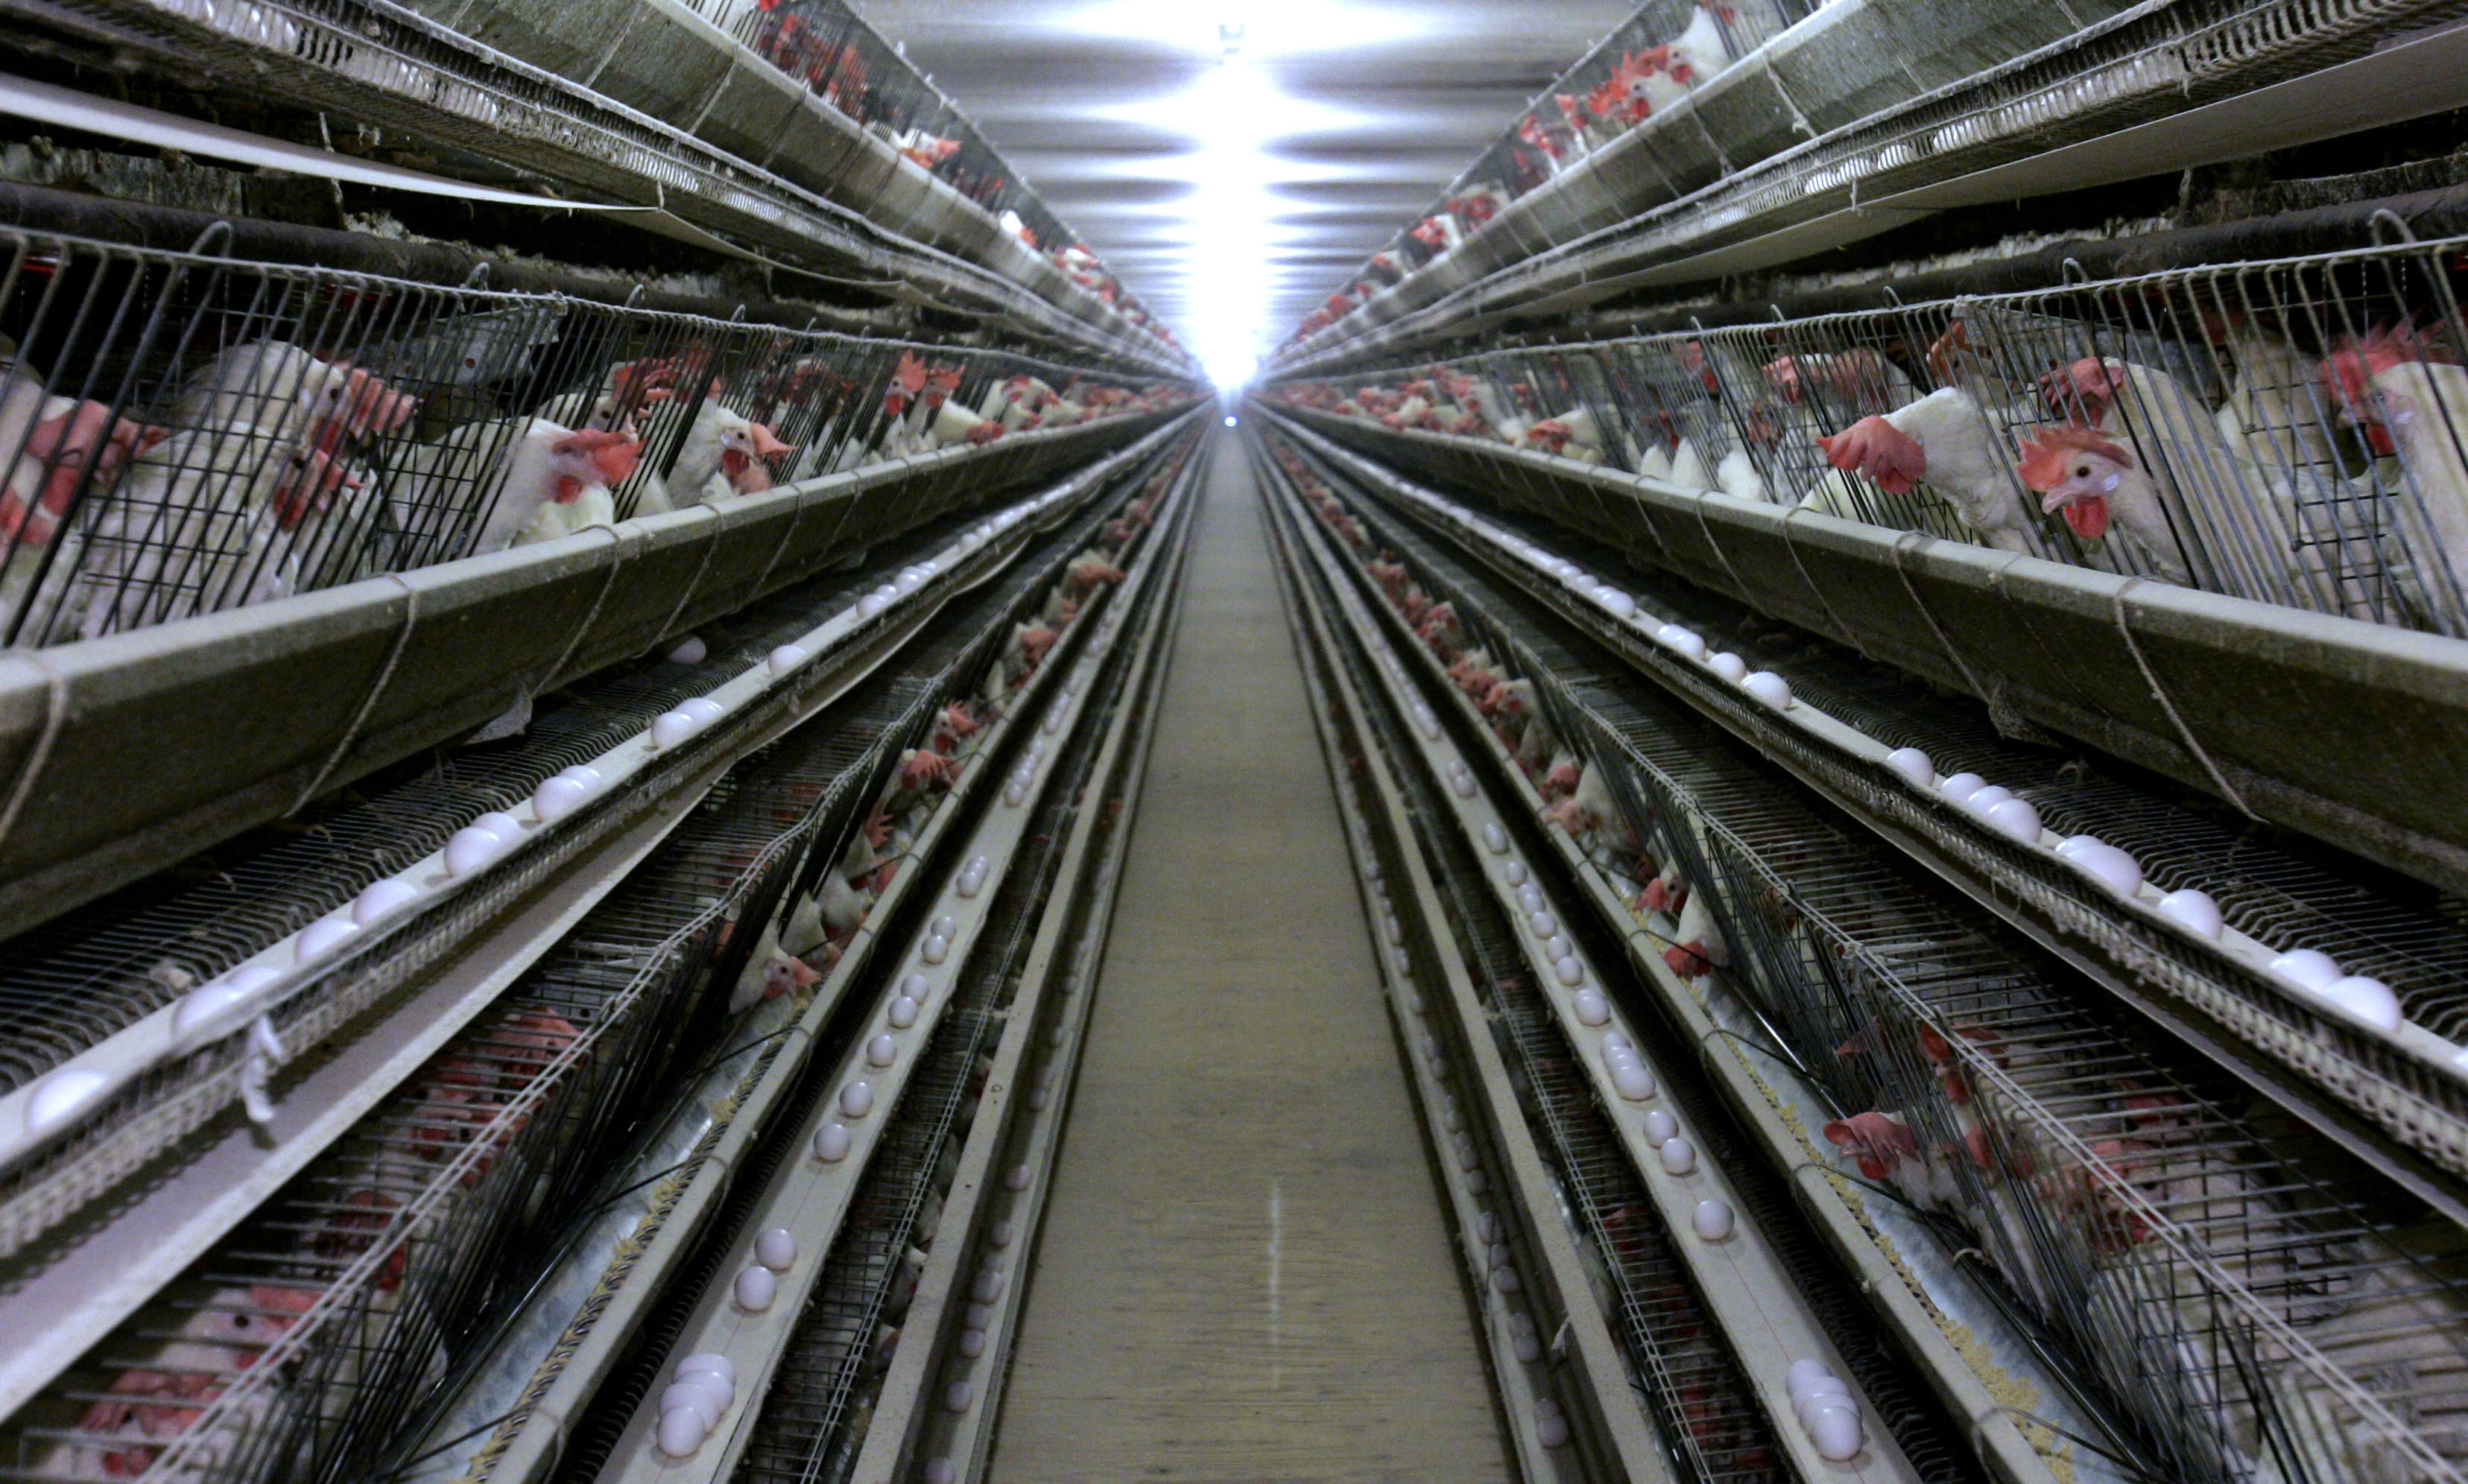 Californians weigh making egg-laying hens cage-free by 2022